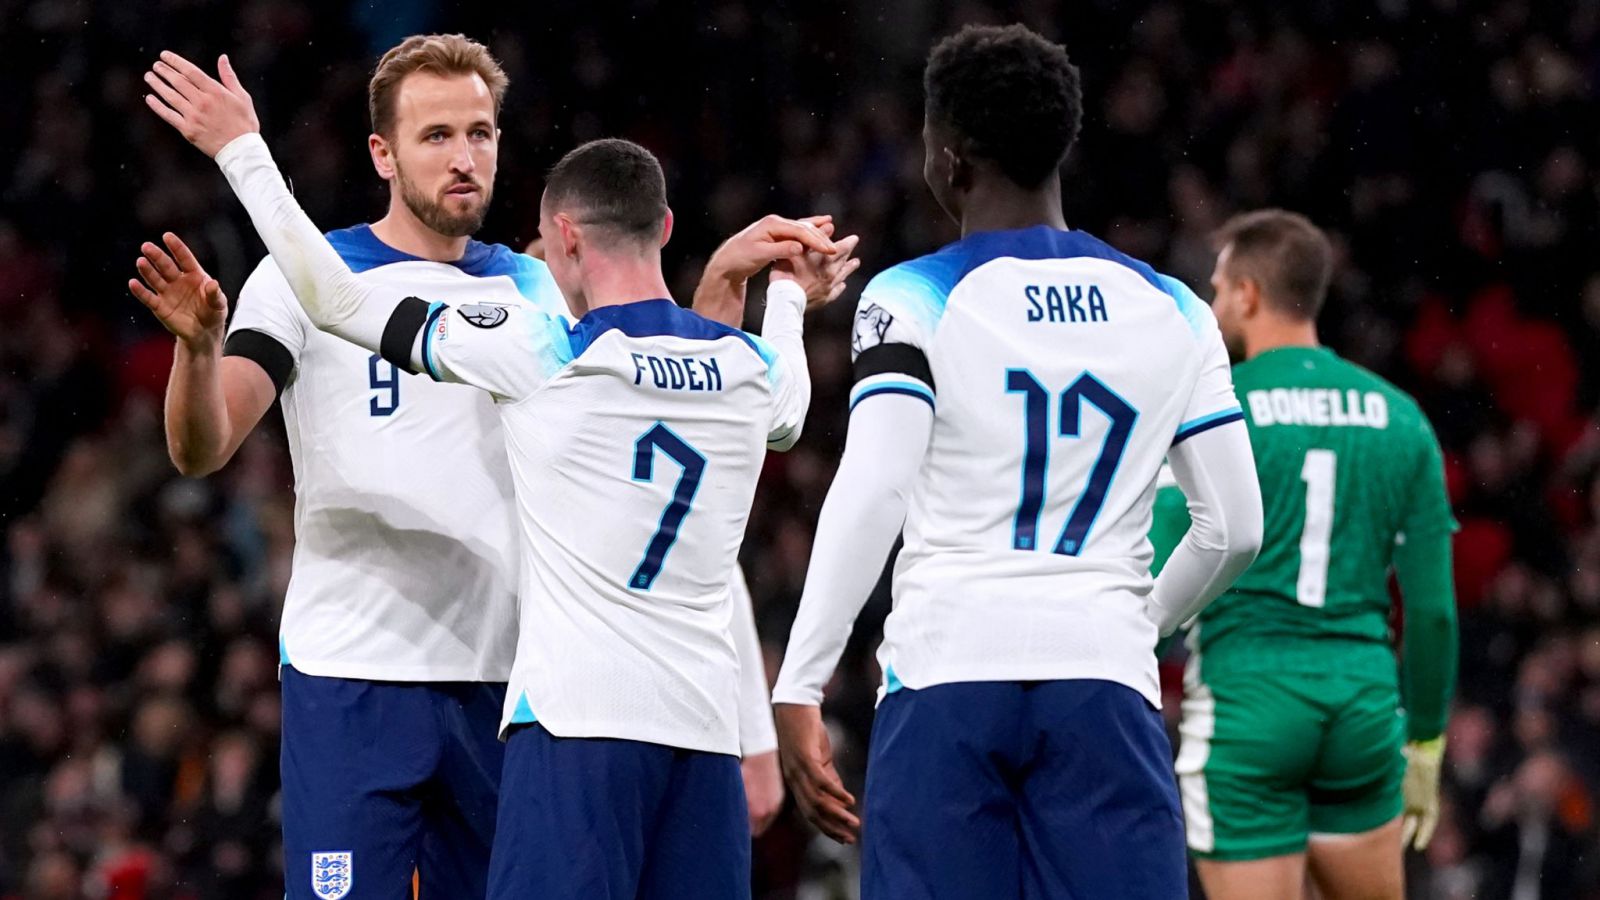 England 2-0 Malta Harry Kane's strike and an own goal give Three Lions unconvincing win in Euro 2024 qualifier, Watch Highlights England 2:0 Malta 2023.11.17 Harry Kane Đẳng Cấp, Video Euro Qualifiers 2024, Euro Qualifiers 2024, Video Vòng Loại Euro 2024, Euro 2024, Euro 2024 Full Goals Highlights, Full Match Euro 2024, Vòng loại Euro 2024, England 2-0 Malta highlights, Watch England 2-0 Malta all goals highlights, Clip bàn thắng England 2-0 Malta, England Full Goals Highlight, Malta Full Goals Highlights